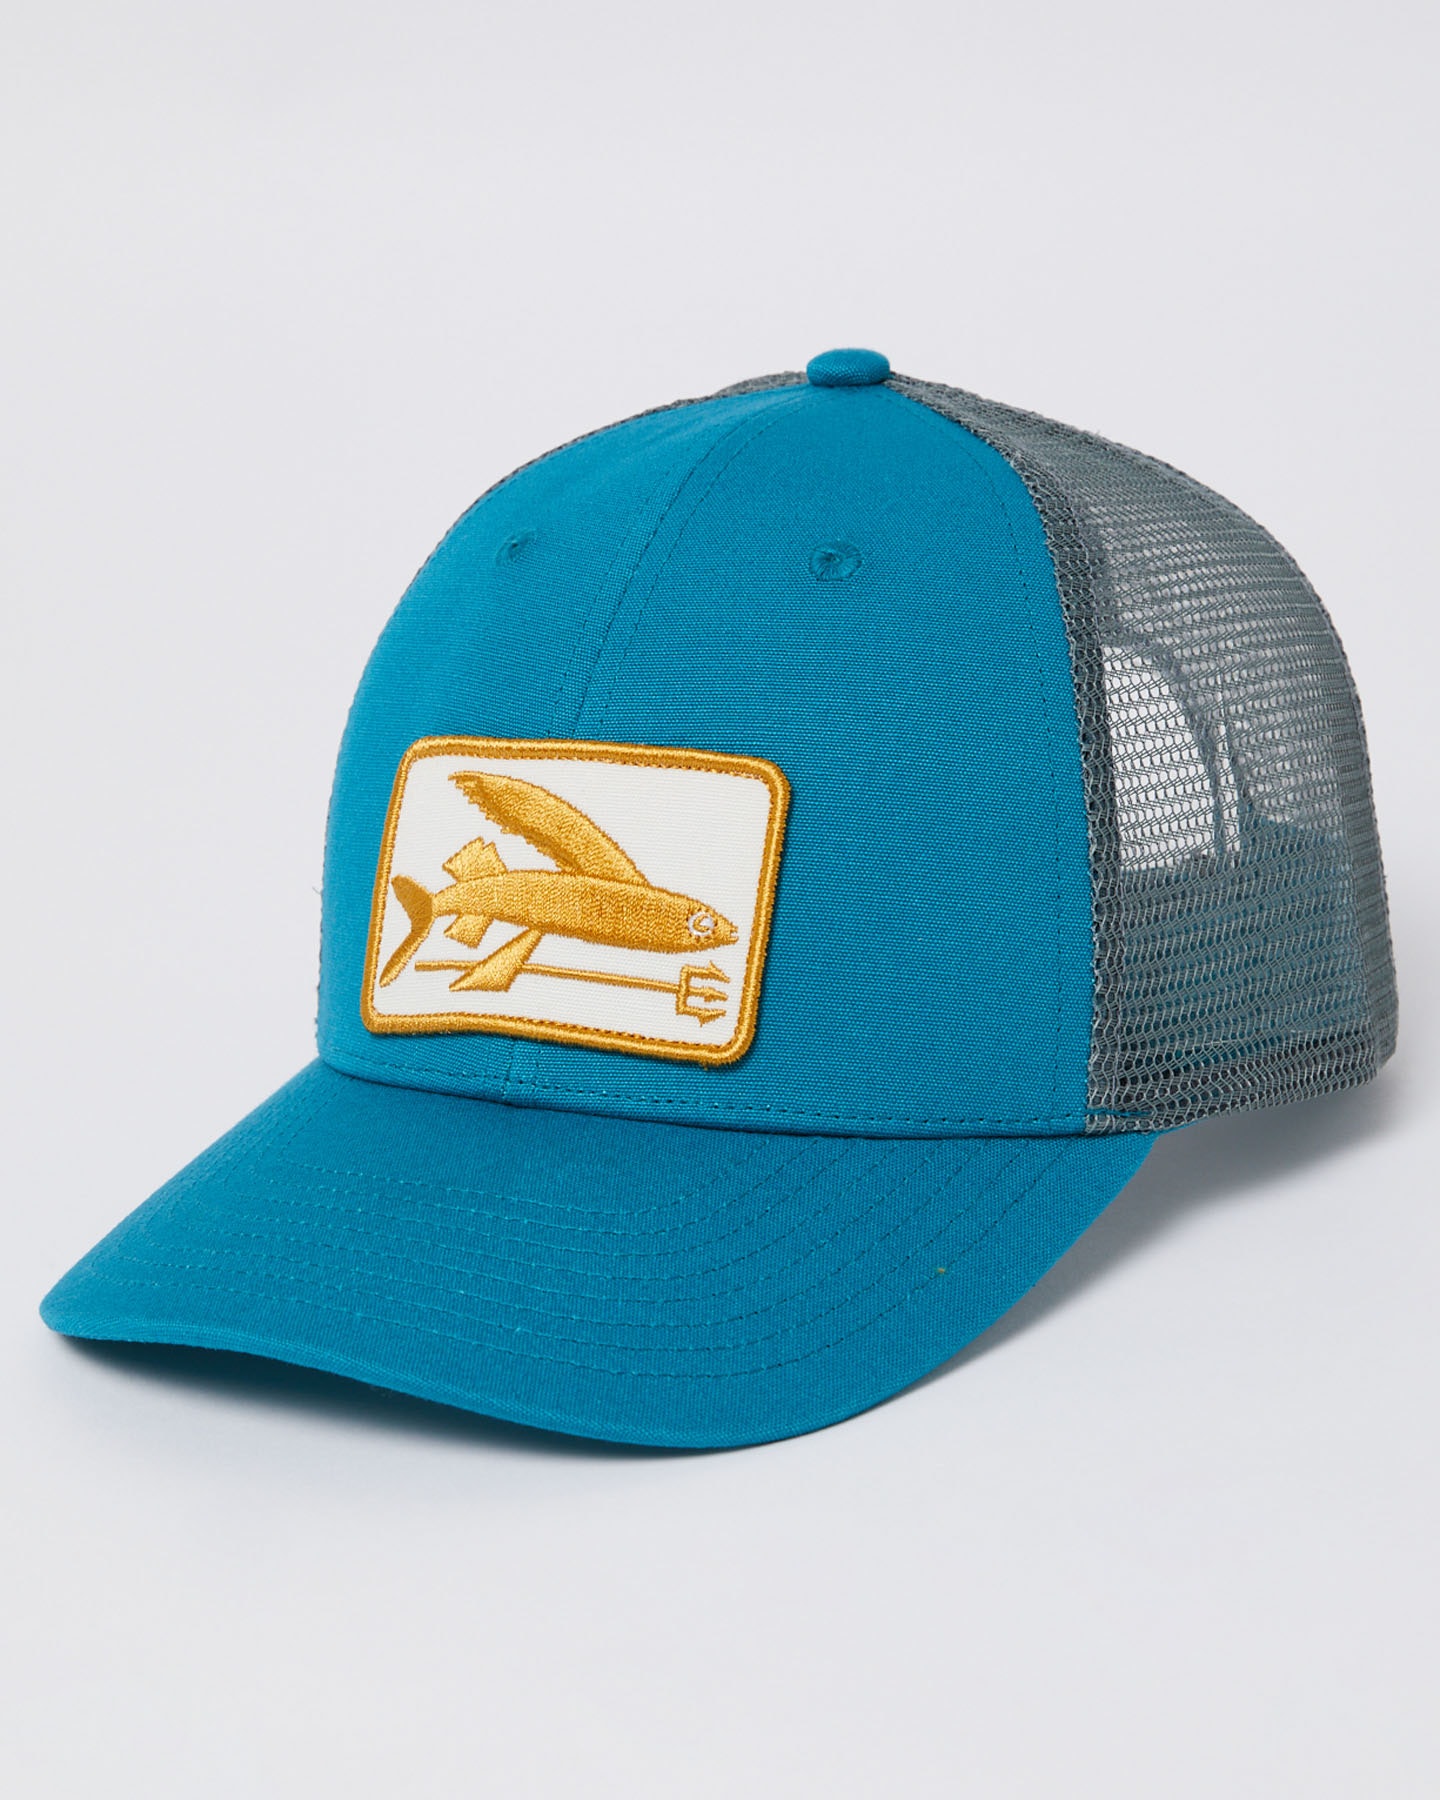 https://www.surfstitch.com/on/demandware.static/-/Sites-ss-master-catalog/default/dw2cc3d6c7/images/38362-FLBY-ALL/BELAY-BLUE-MENS-ACCESSORIES-PATAGONIA-HEADWEAR-38362-FLBY-ALL_1.JPG